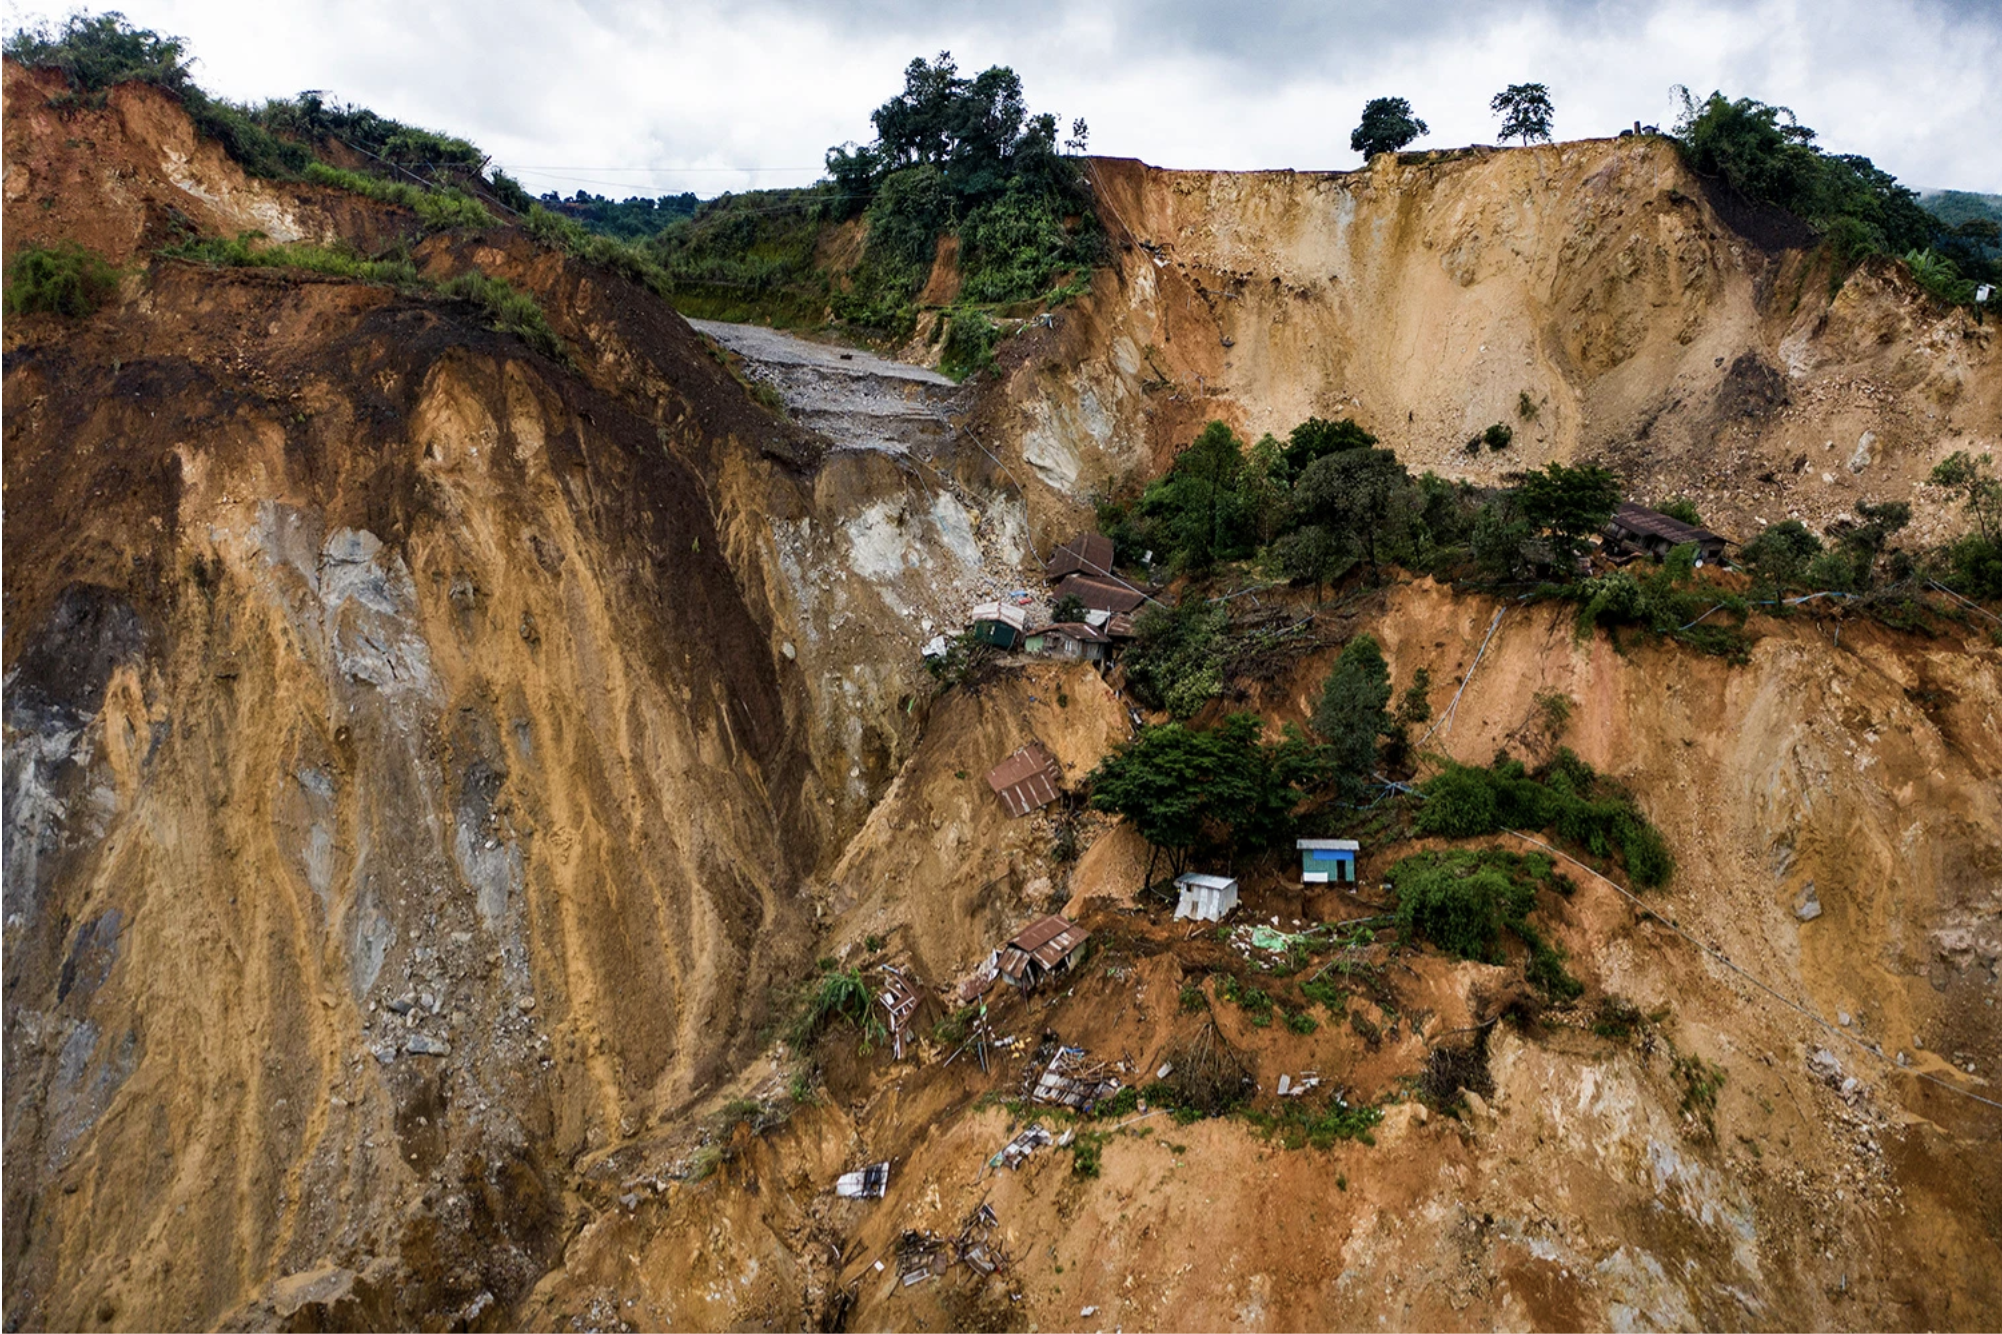 A landscape view shows a recent landslide at Gwi Hka jade mining site in Hpakant, Kachin state, Myanmar, on July 16. Image by Hkun Lat. Myanmar, 2020.